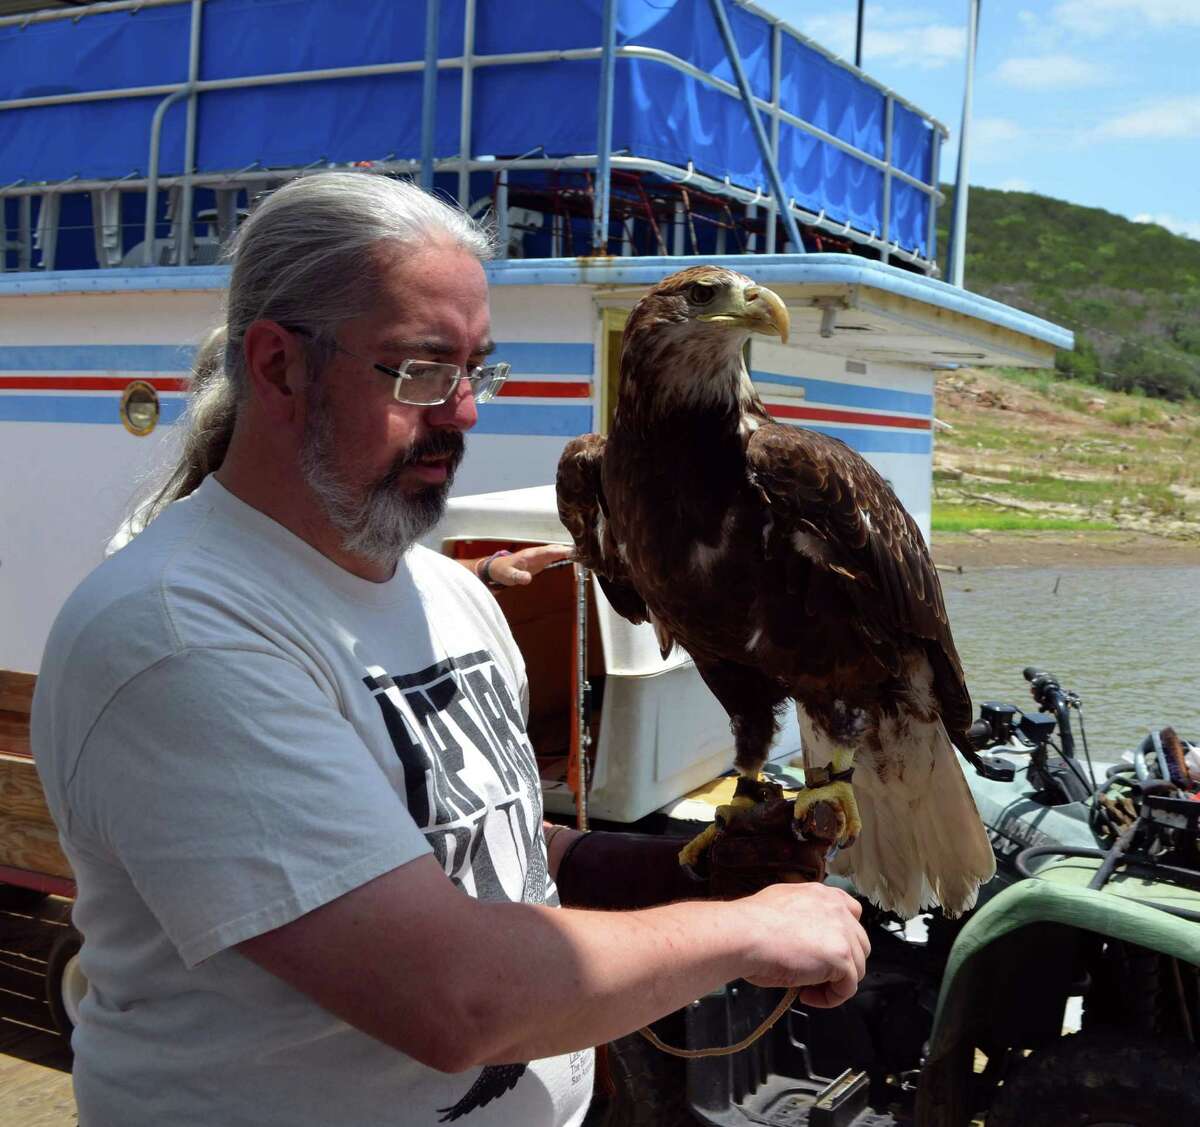 Ian Joplin of Last Chance Forever Bird of Prey Conservancy holds a bald eagle on the Vanishing Texas River Cruise dock.